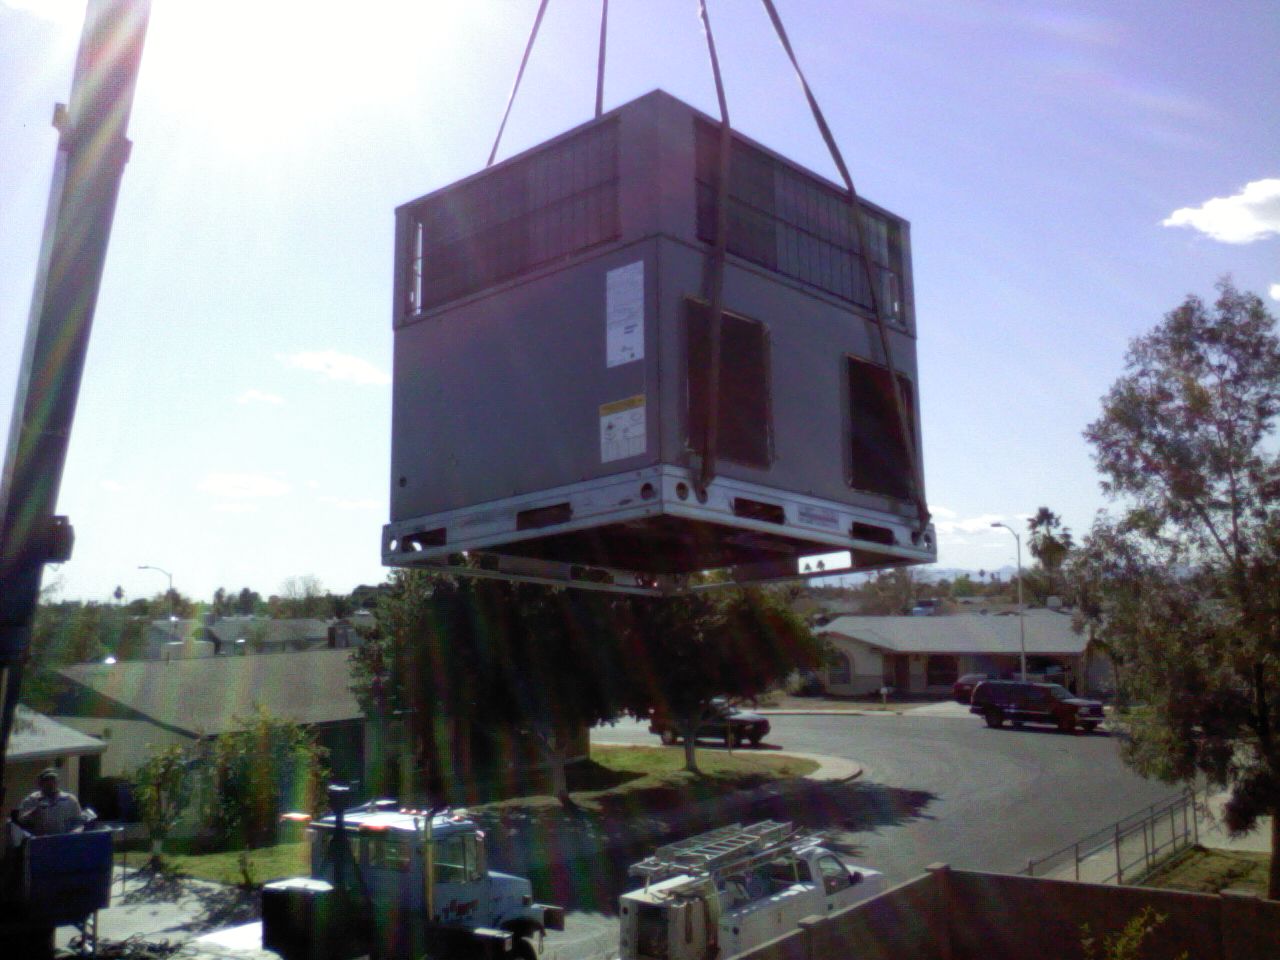 Heil heat pump unit hoisted up to roof by crane